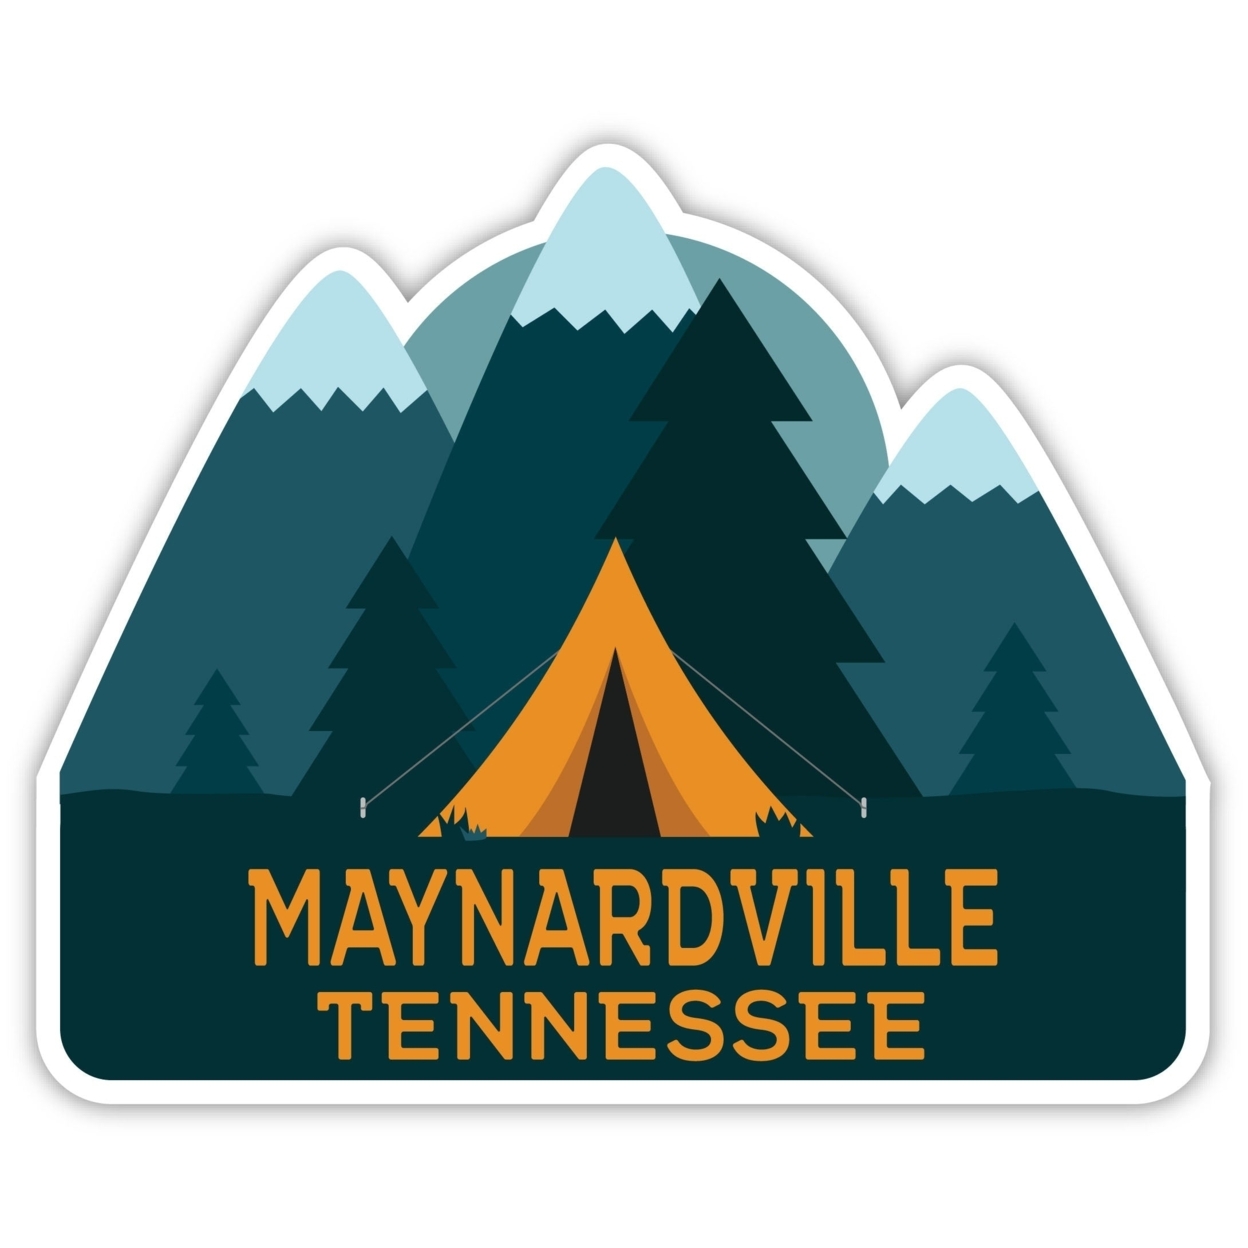 Maynardville Tennessee Souvenir Decorative Stickers (Choose Theme And Size) - 4-Inch, Tent